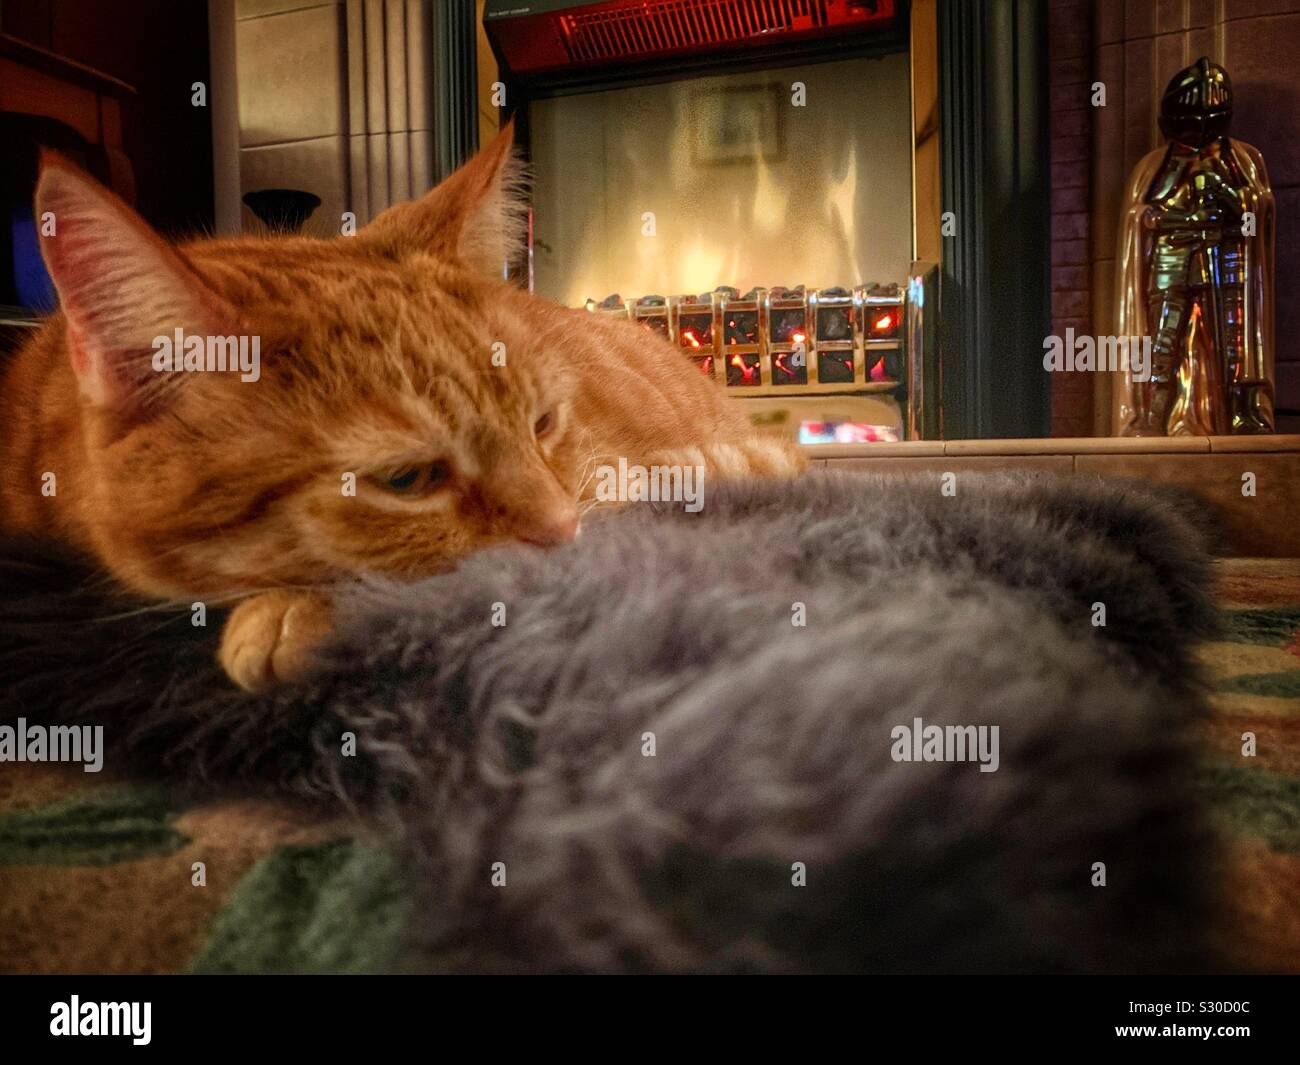 Male ginger cat laying in sheep skin fur rug in front of artificial flame effect electric fire Stock Photo